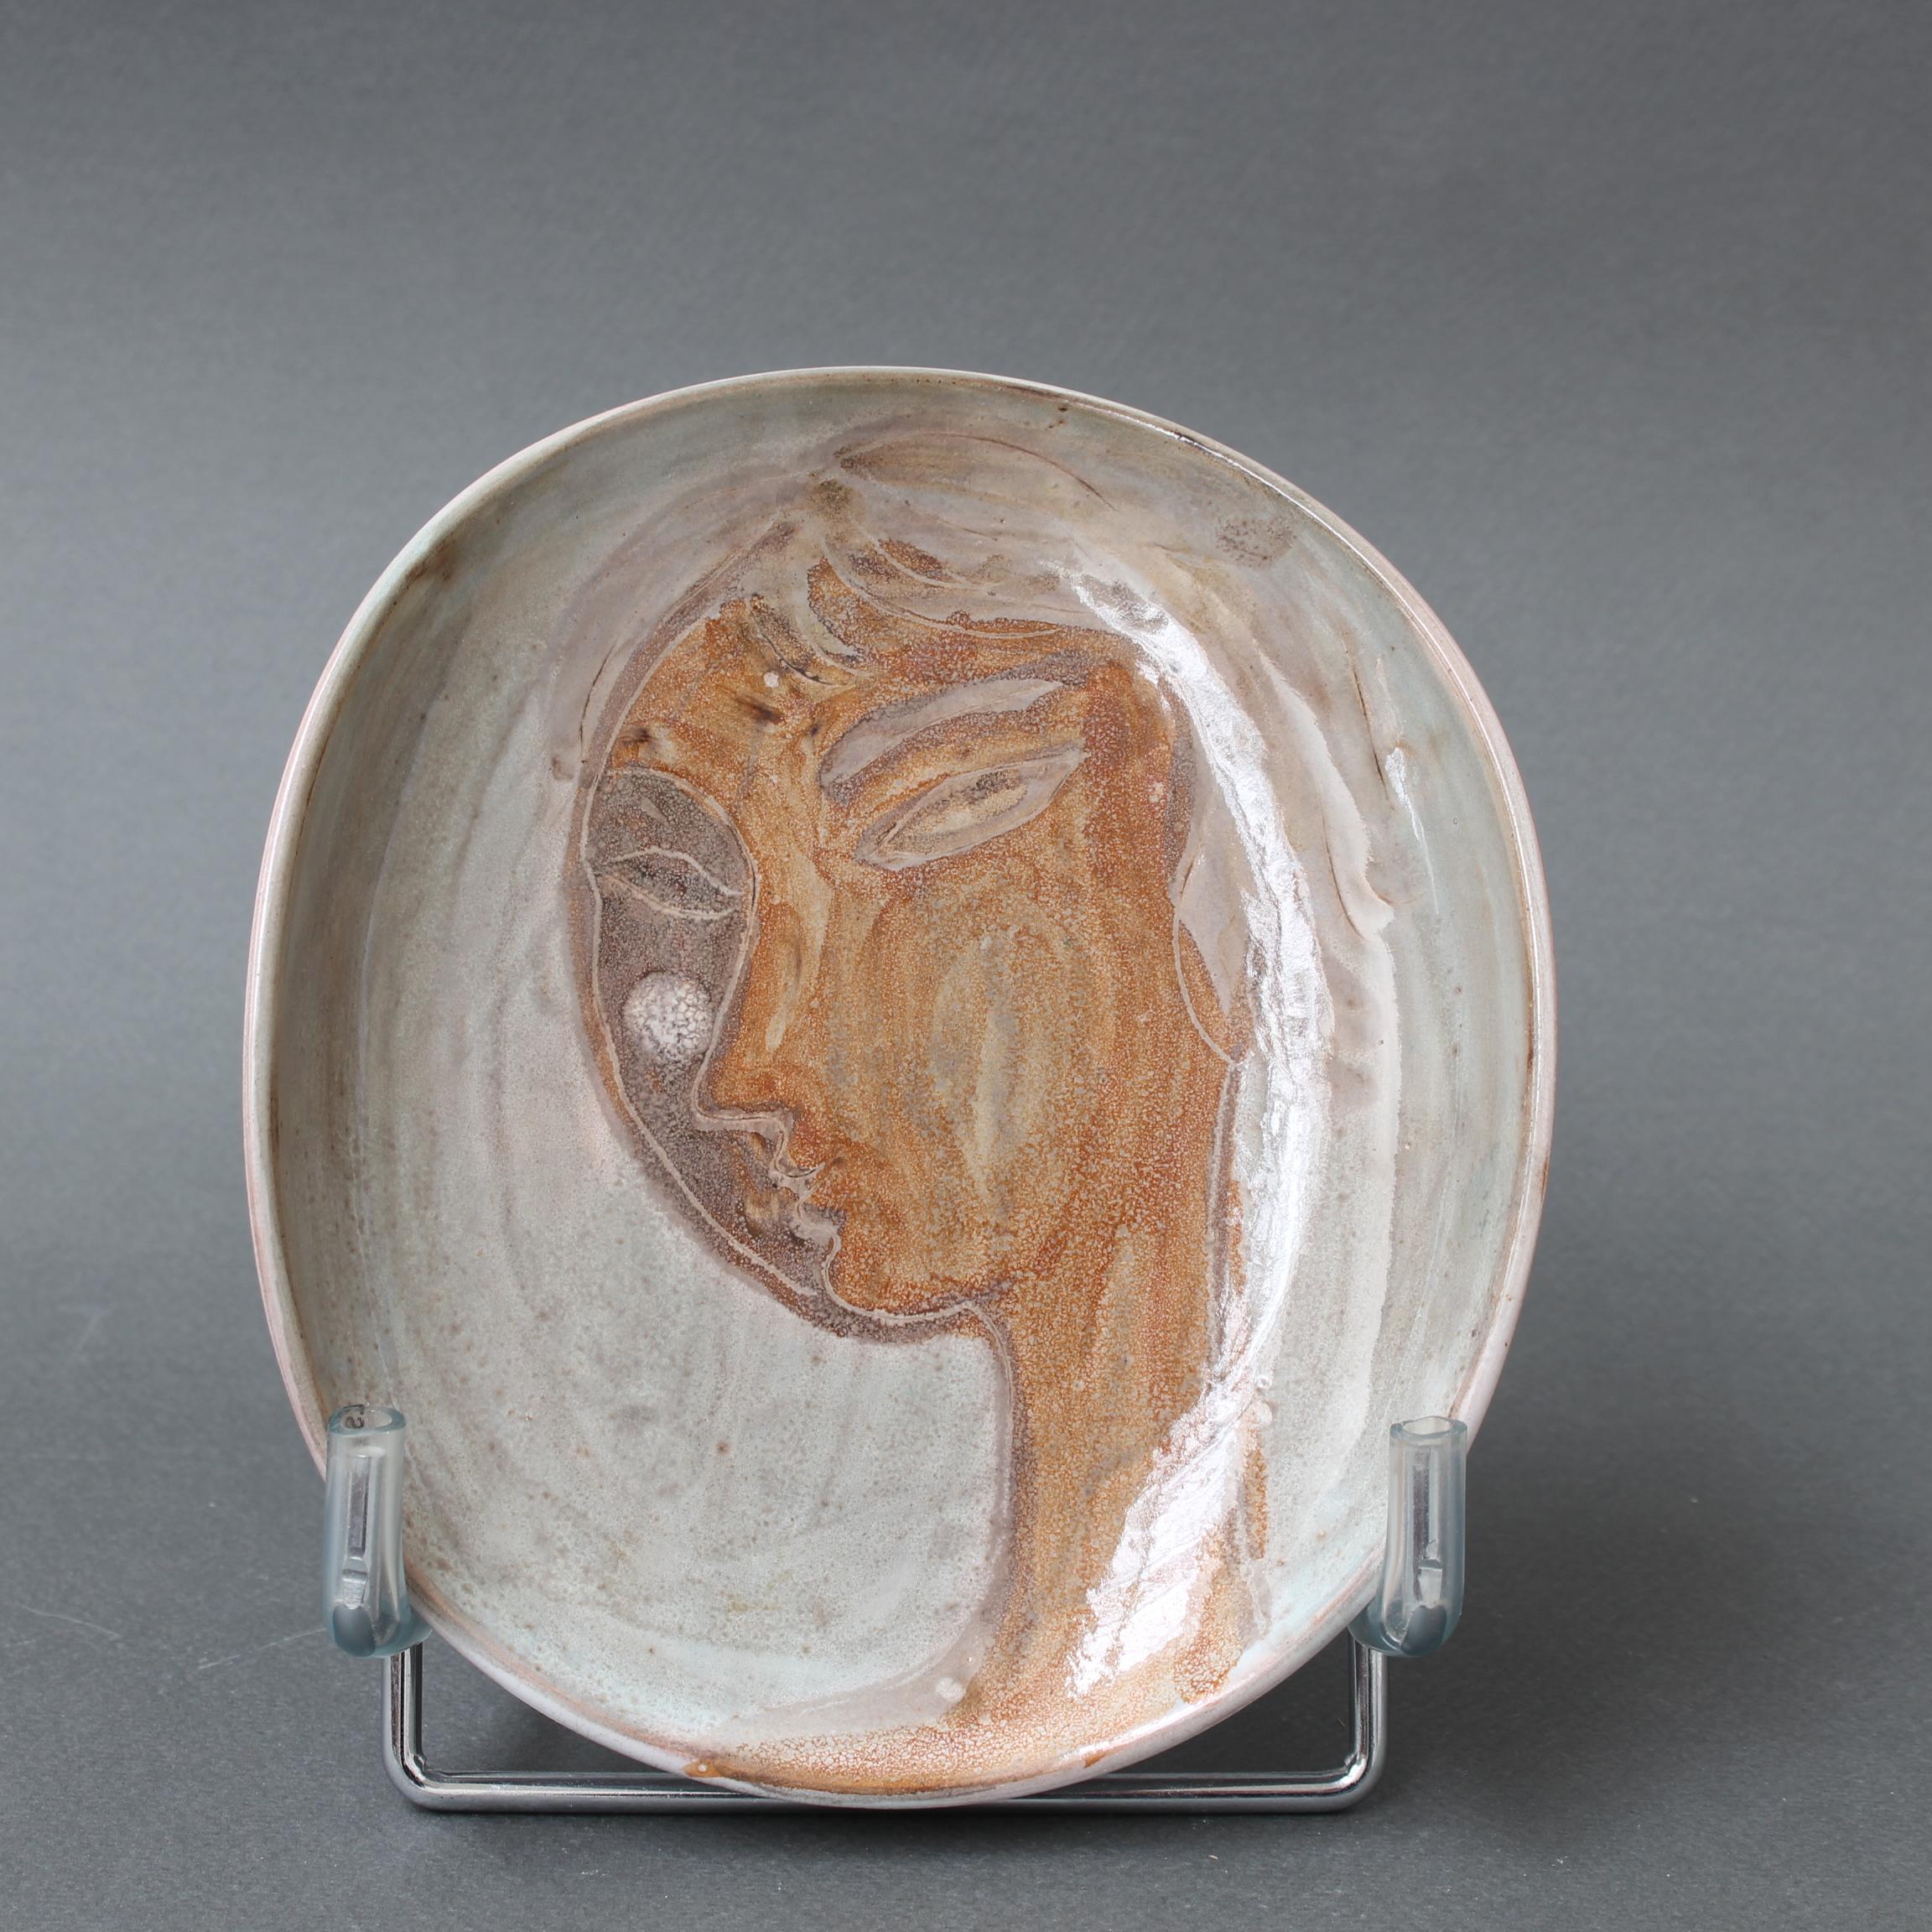 French Mid-Century curved ceramic plate hand-painted with a woman's face with short hair, by Atelier du Grand Chêne (circa 1950s). The piece is absolutely charming and has a whiff of Picasso about it - indeed the couple who founded Le Grand Chêne